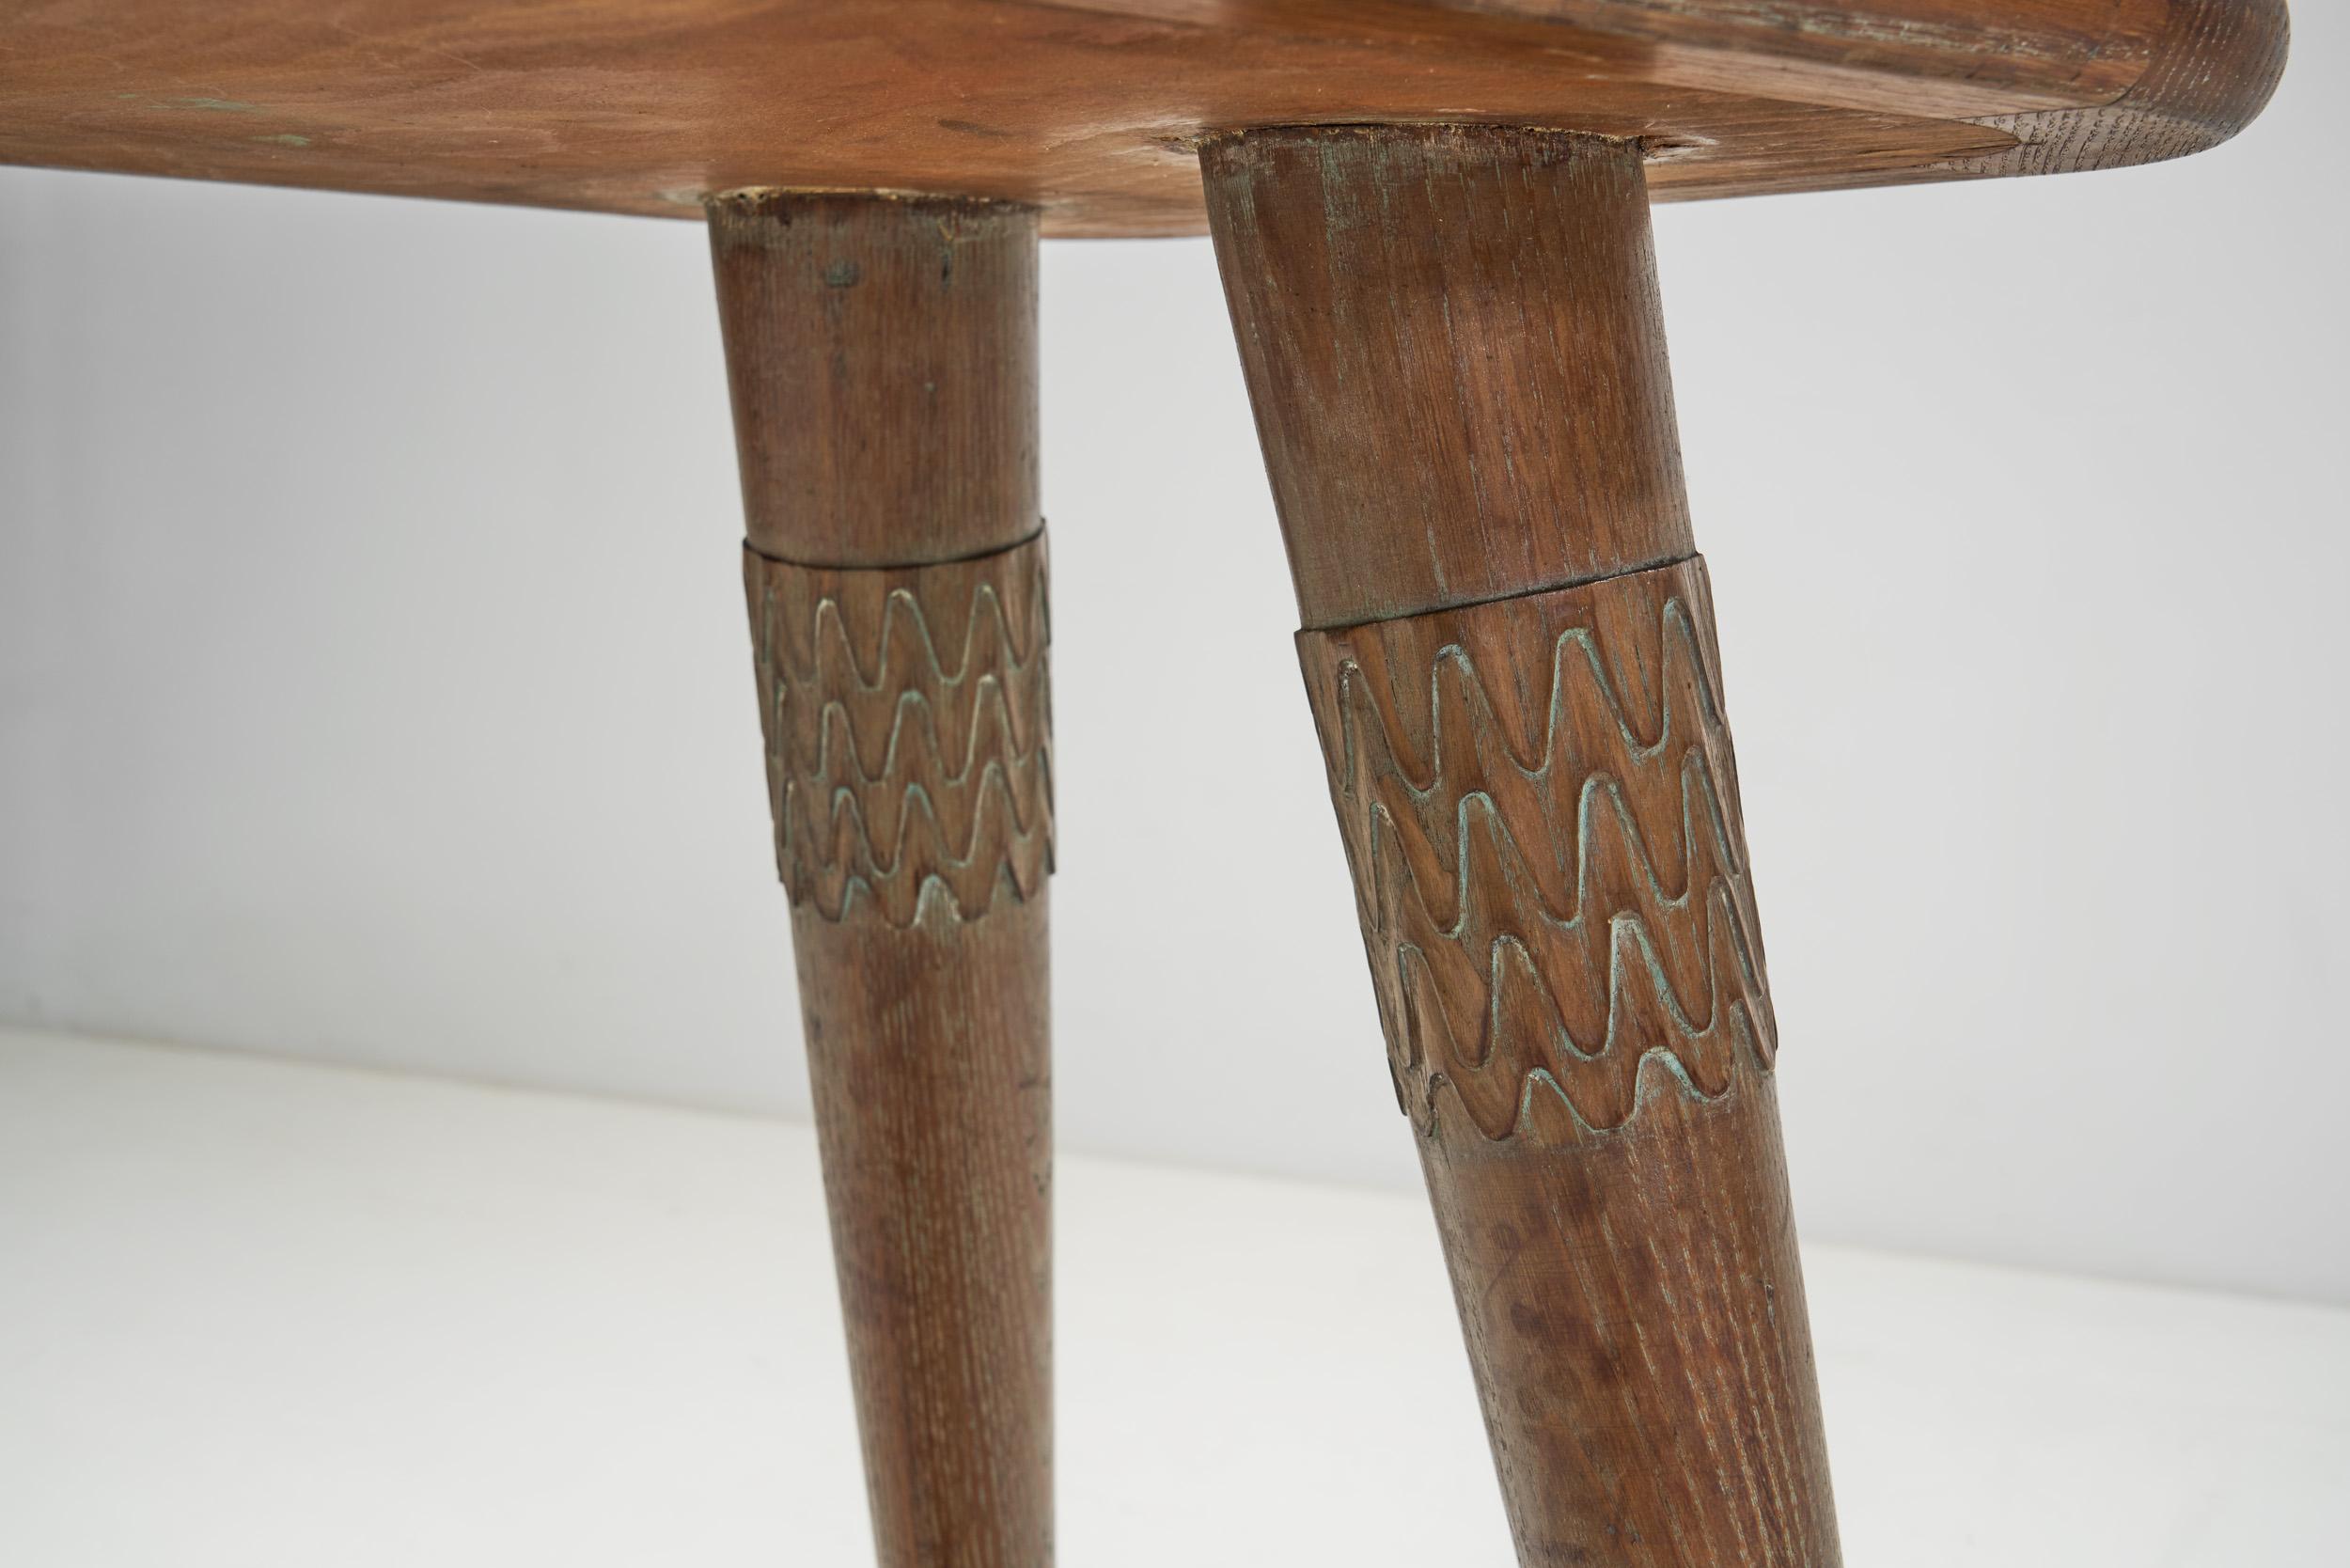 Artisan Wood Side Table with Decorative Carved Legs, Europe 1950s For Sale 8